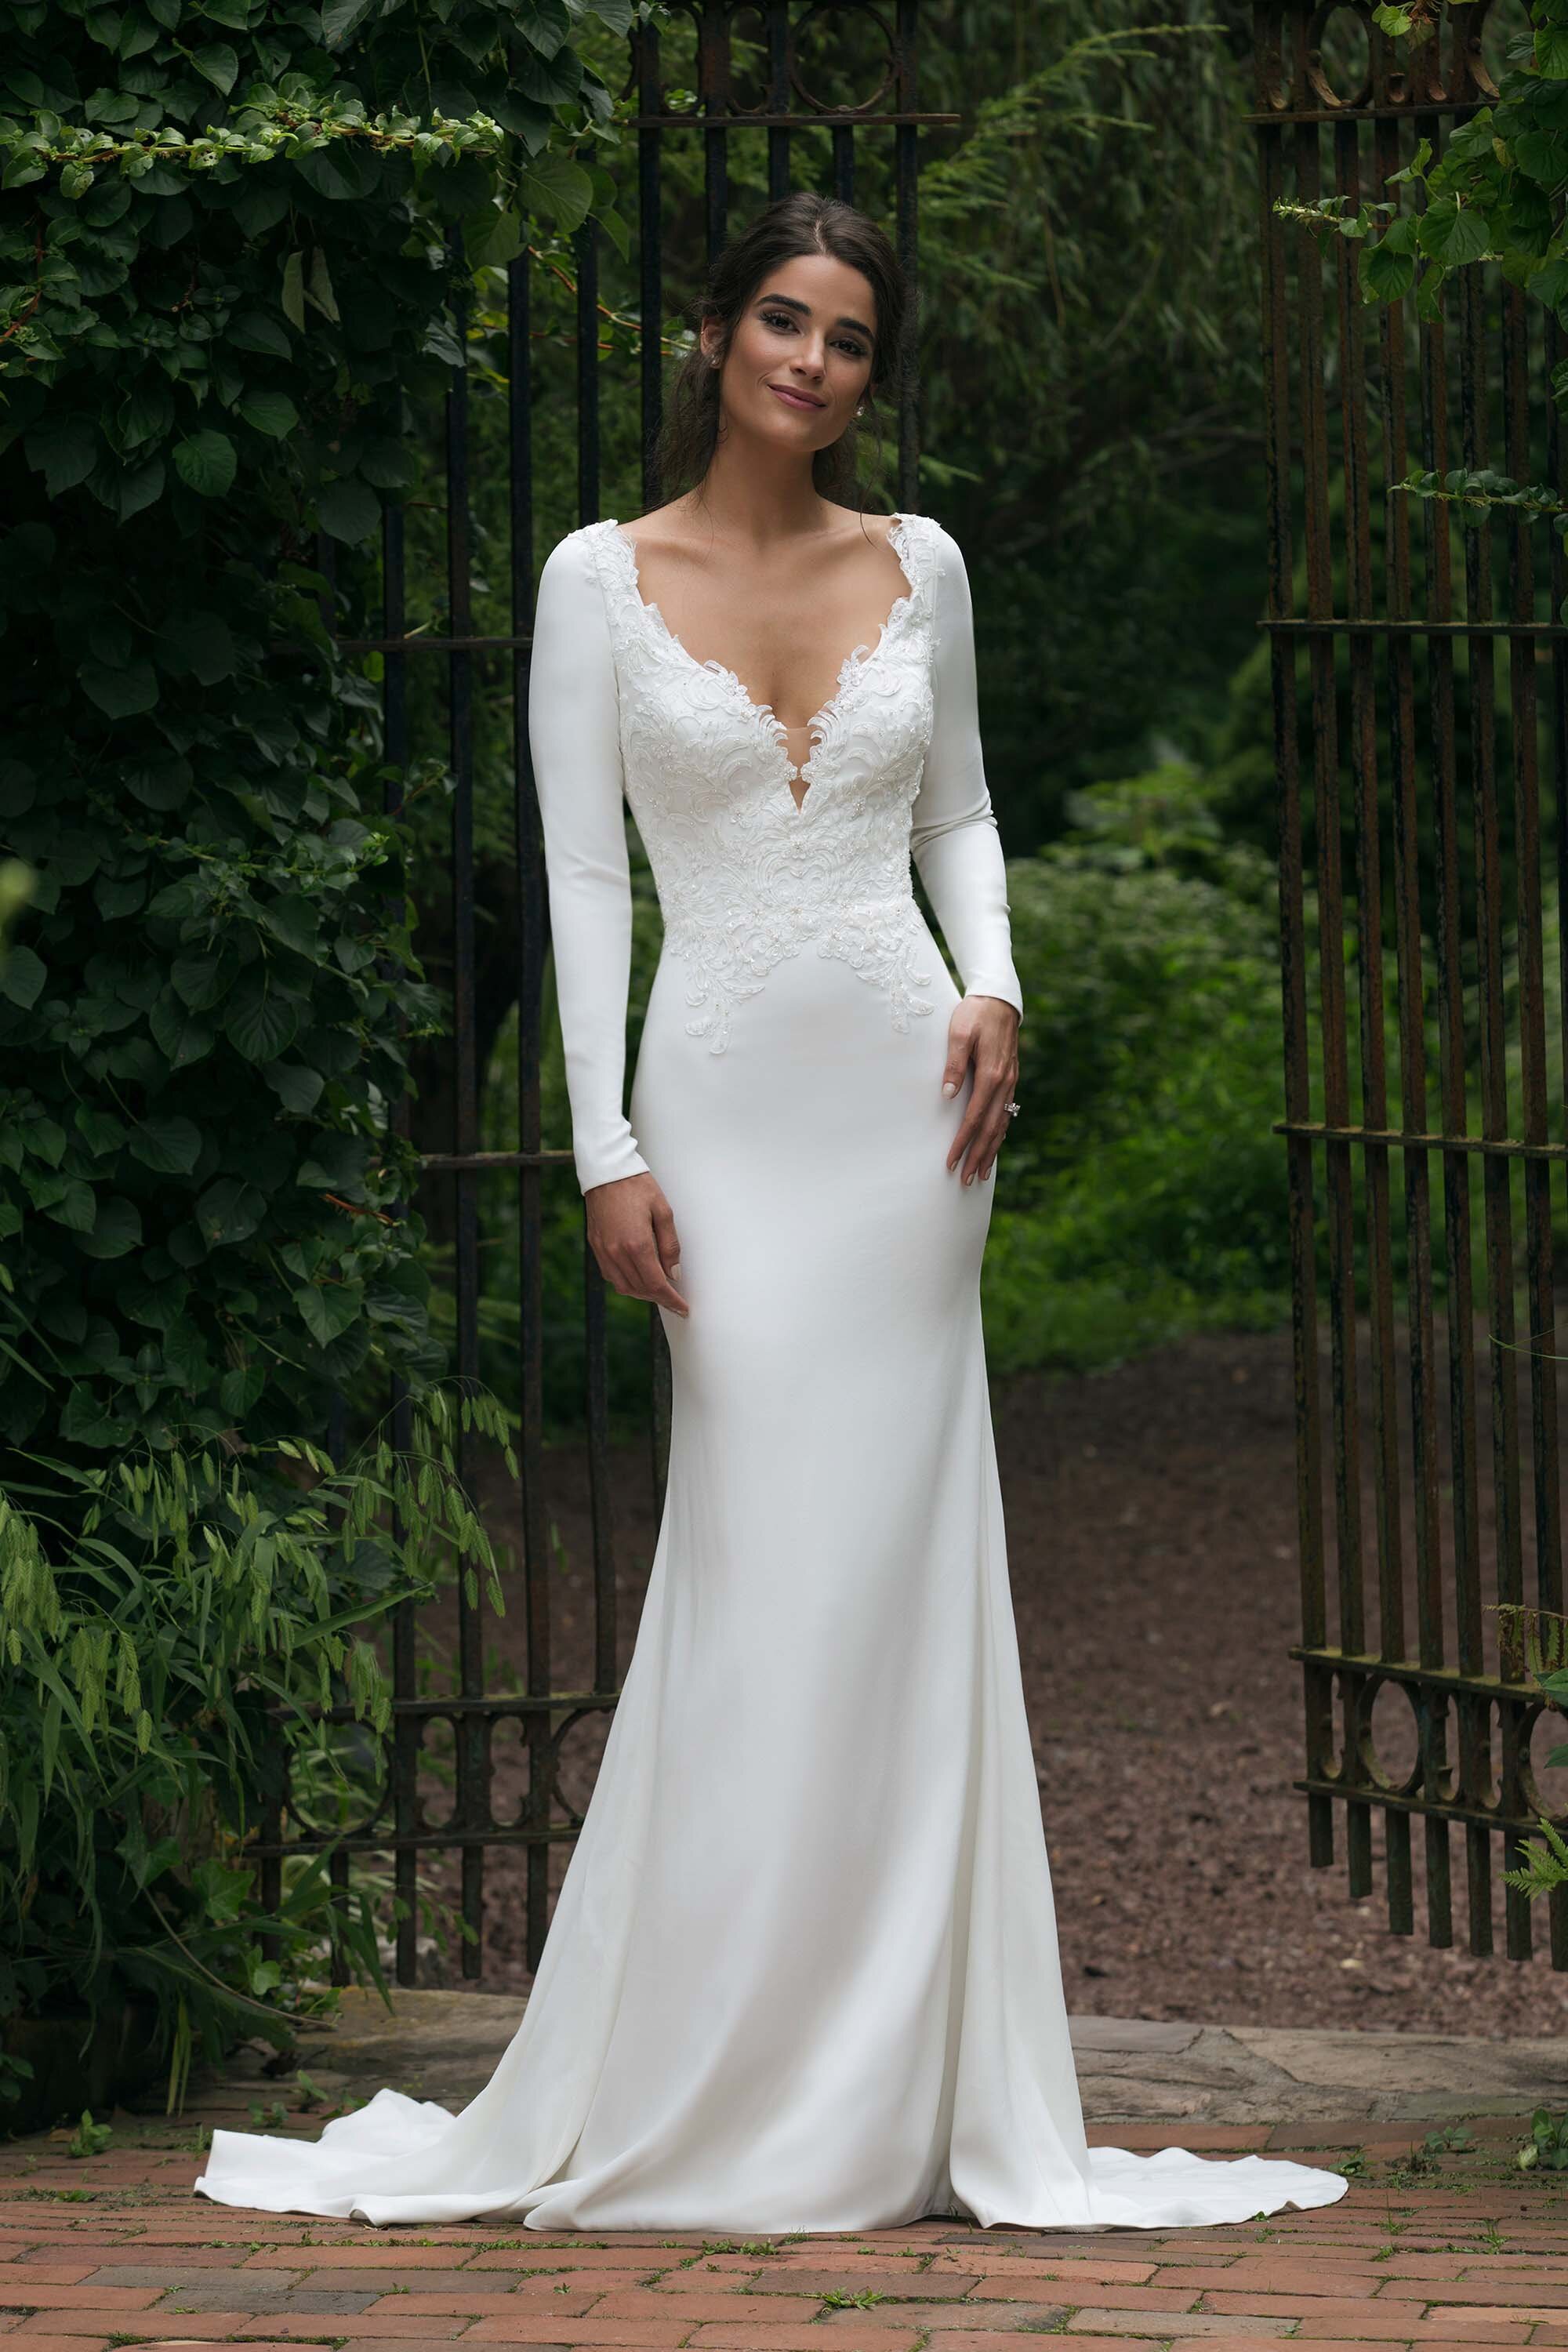 Best of 2020: Bridal Gowns - Nouba Weddings - Best of 2020: Bridal Gowns